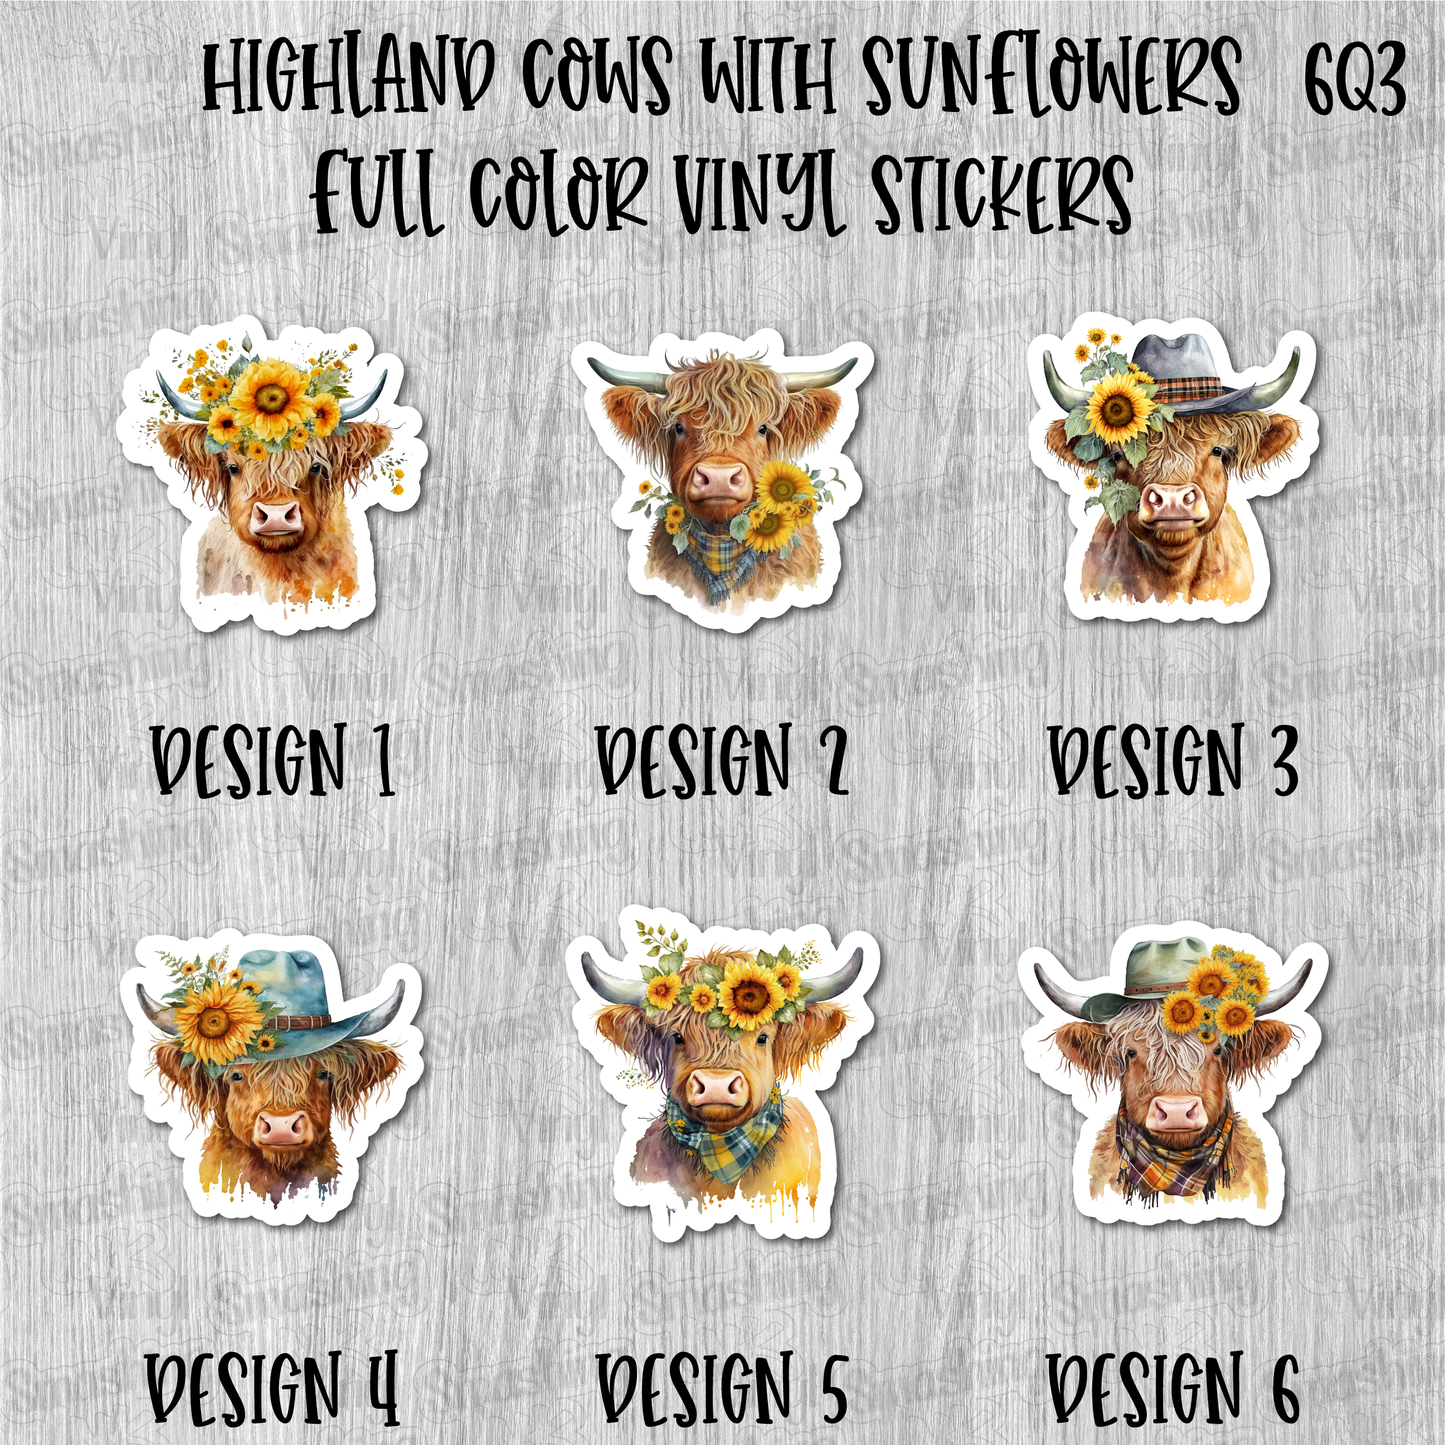 Highland Cows With Sunflowers - Full Color Vinyl Stickers (SHIPS IN 3-7 BUS DAYS)